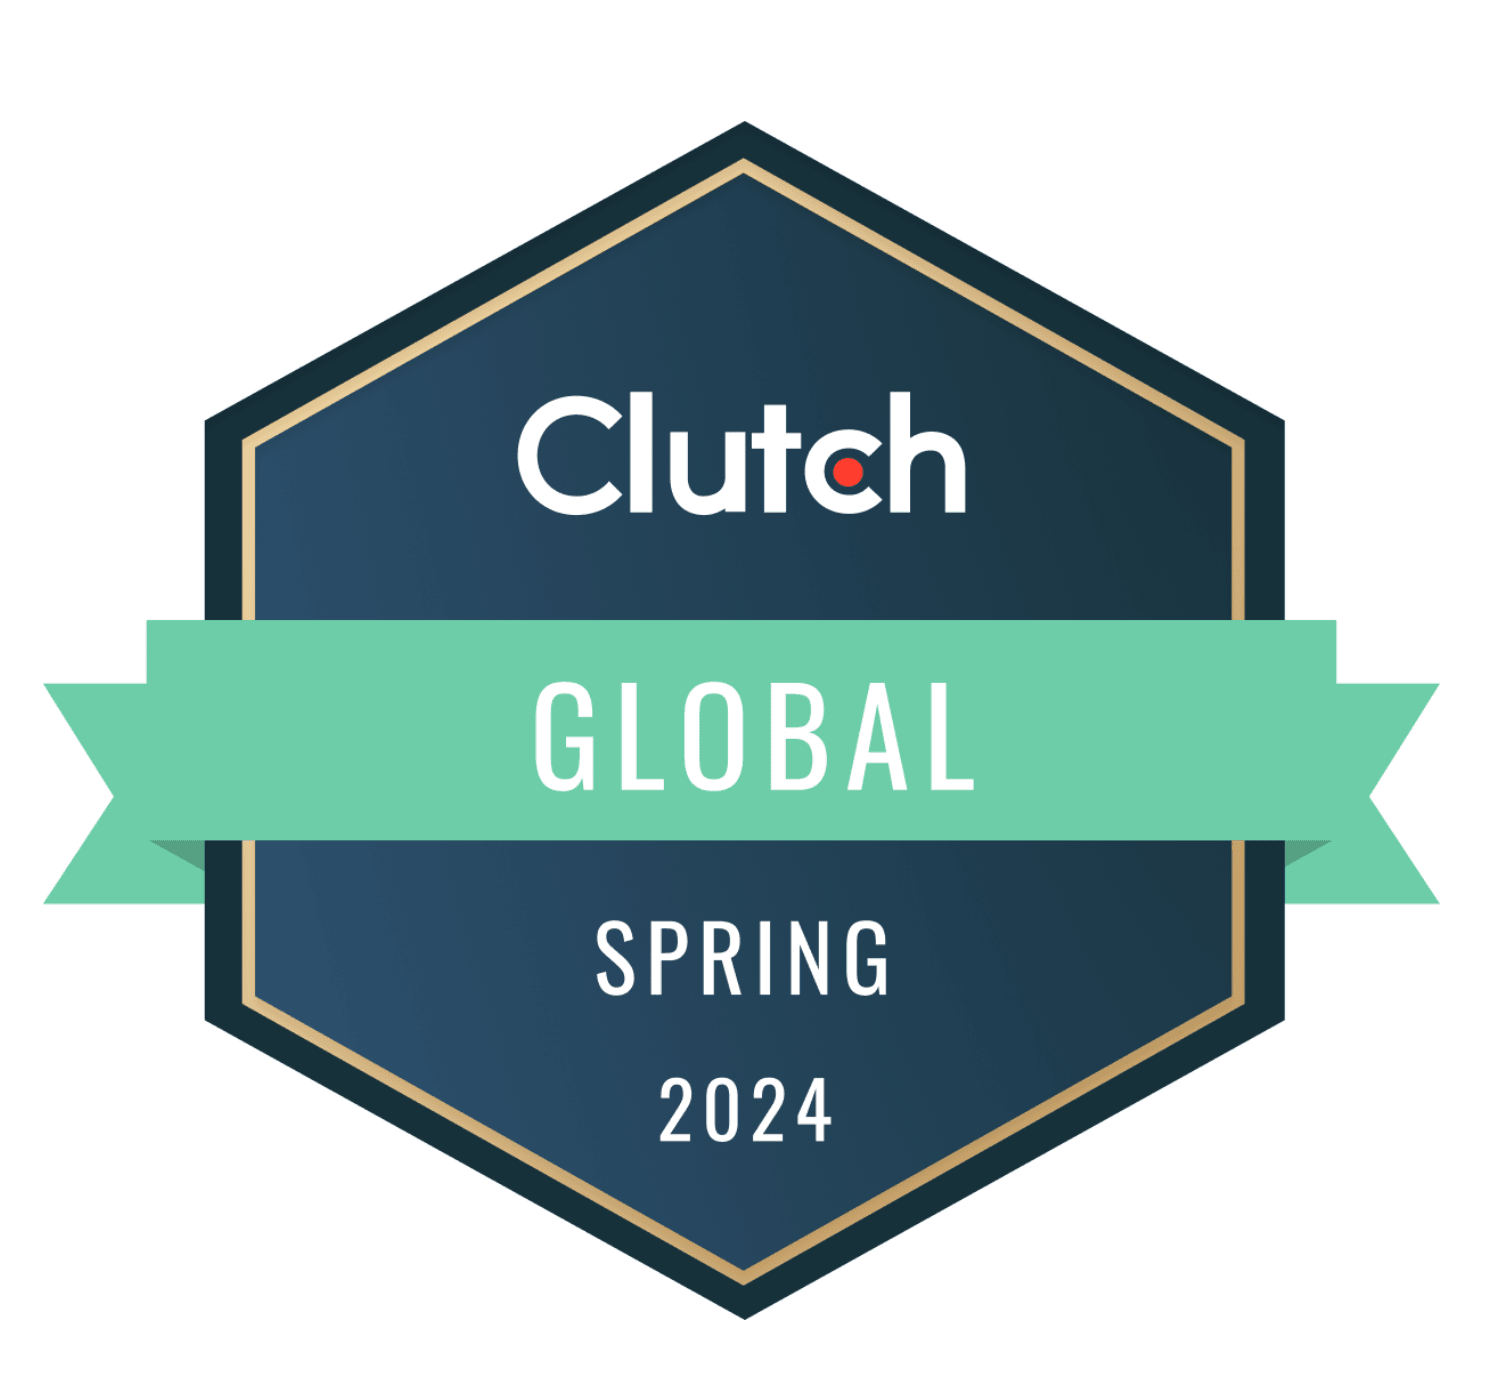  Seedium Recognized as a Clutch Global Leader for Spring 2024